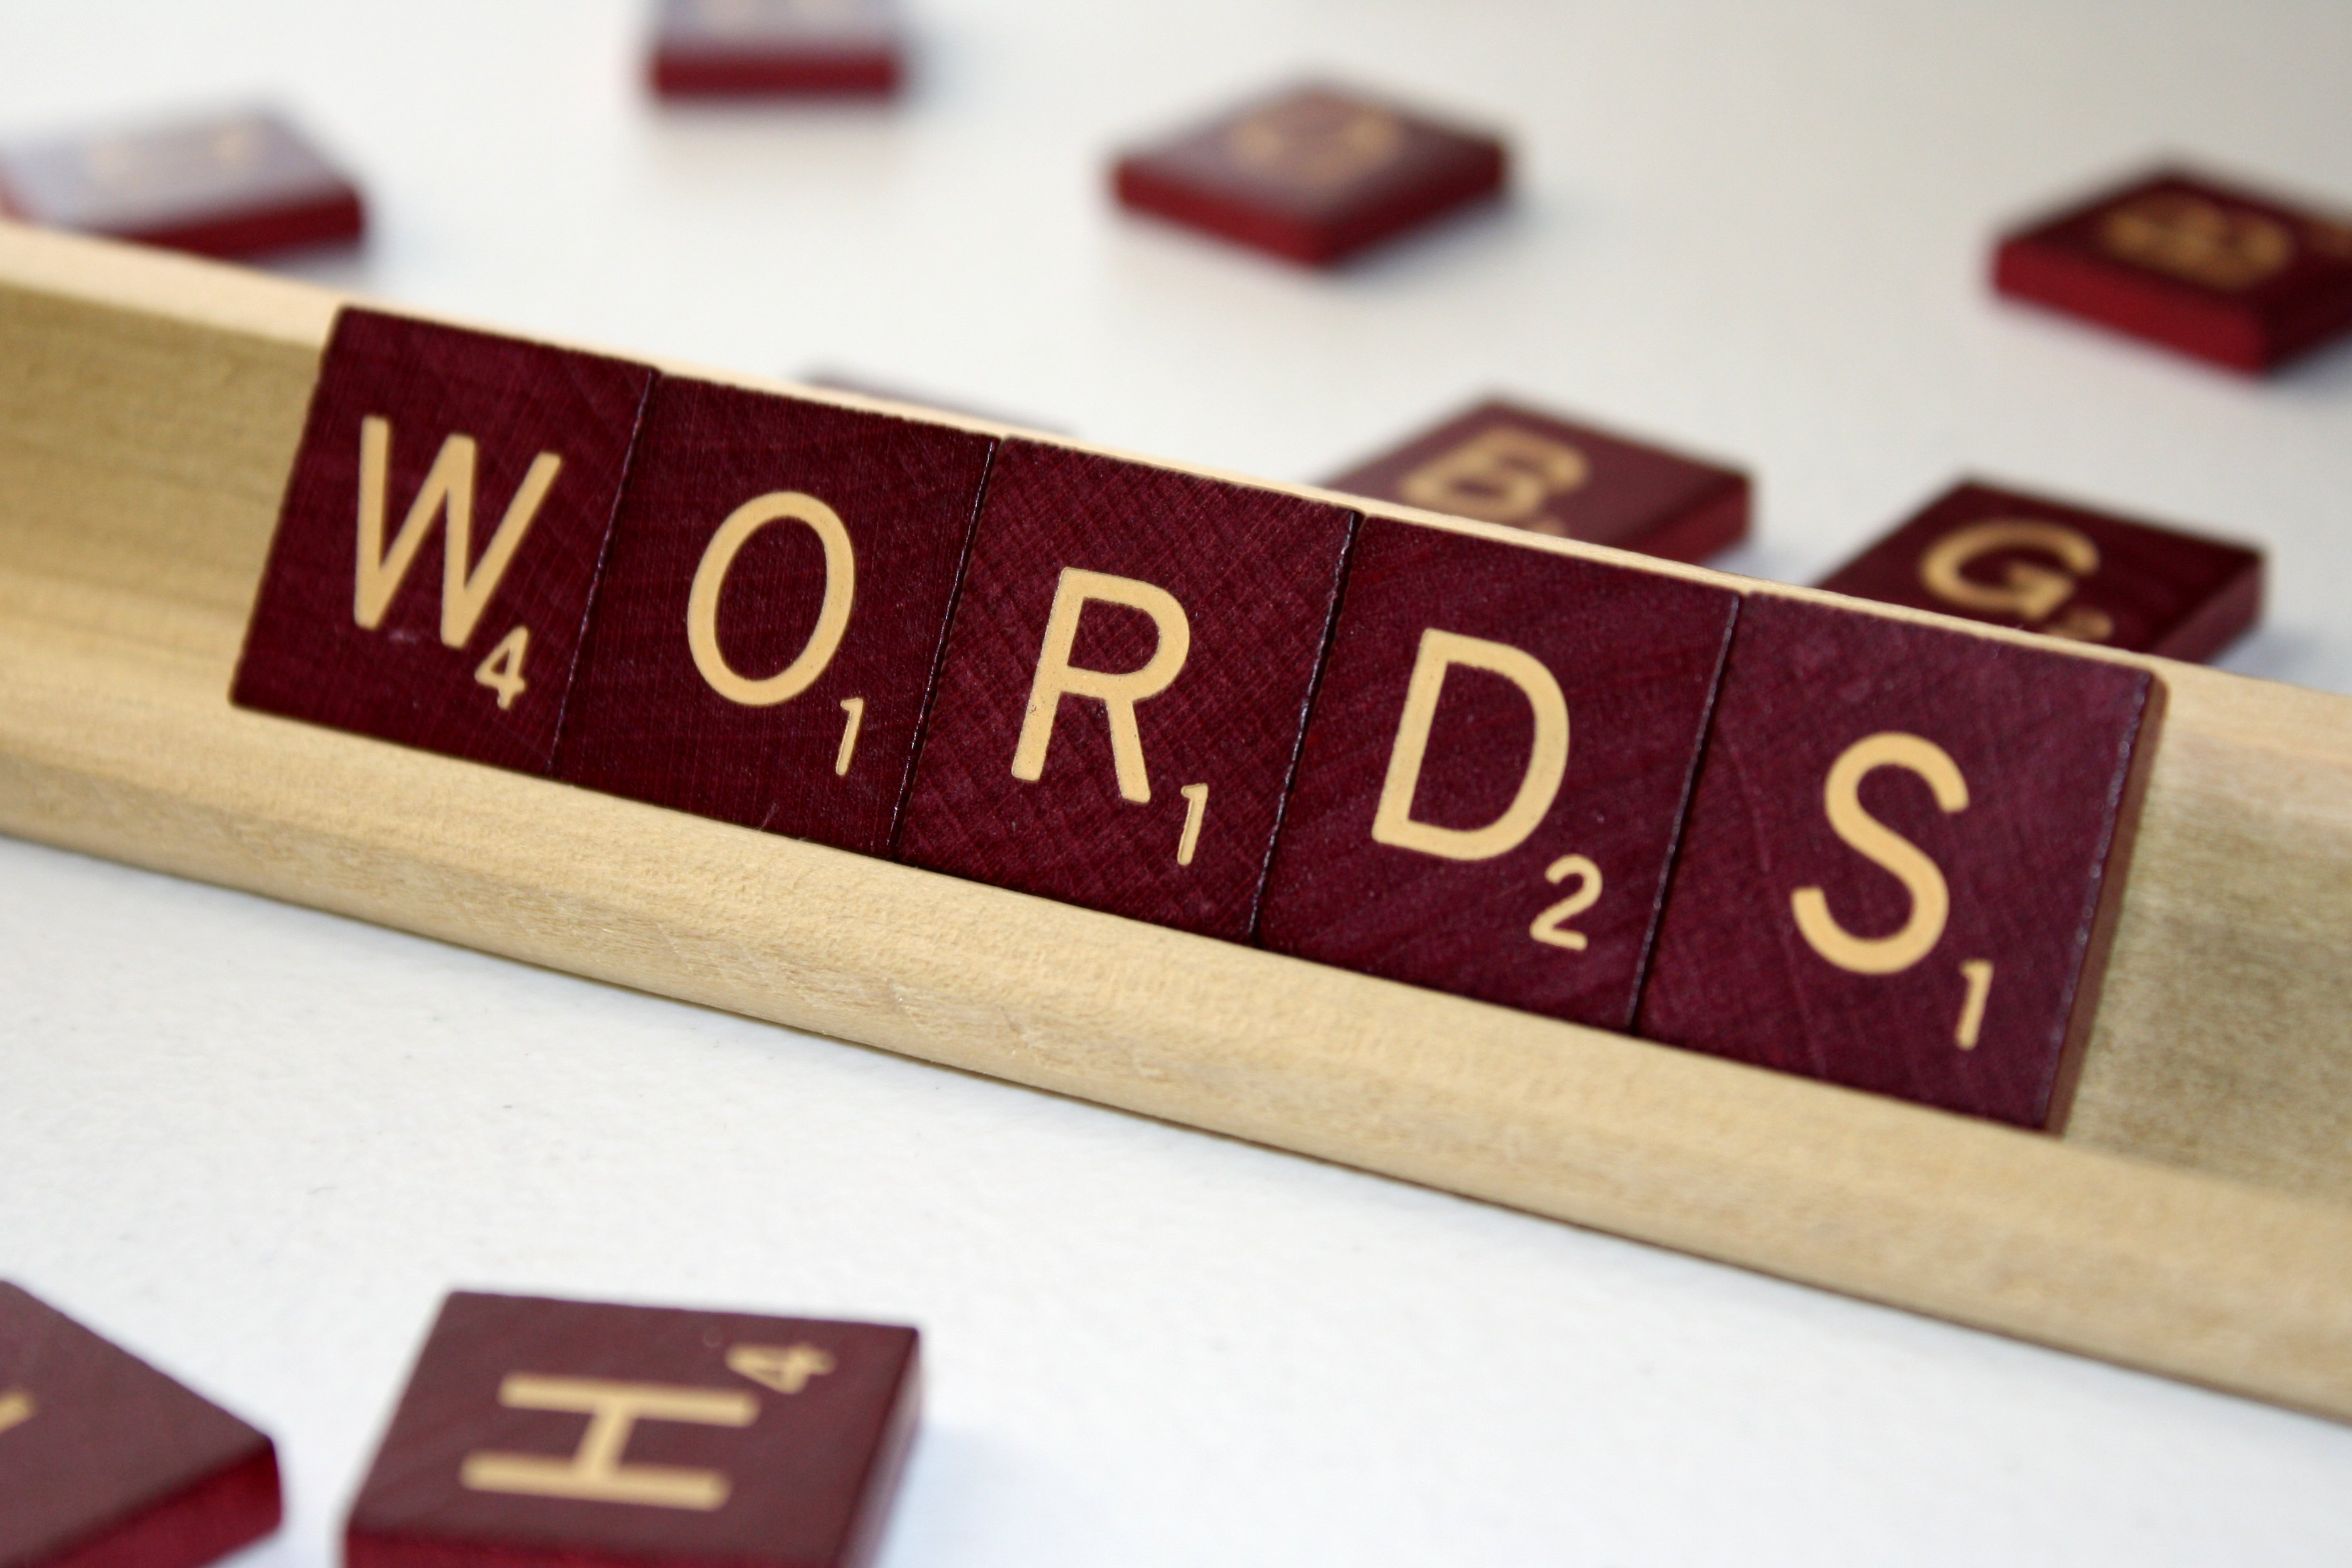 all scrabble words